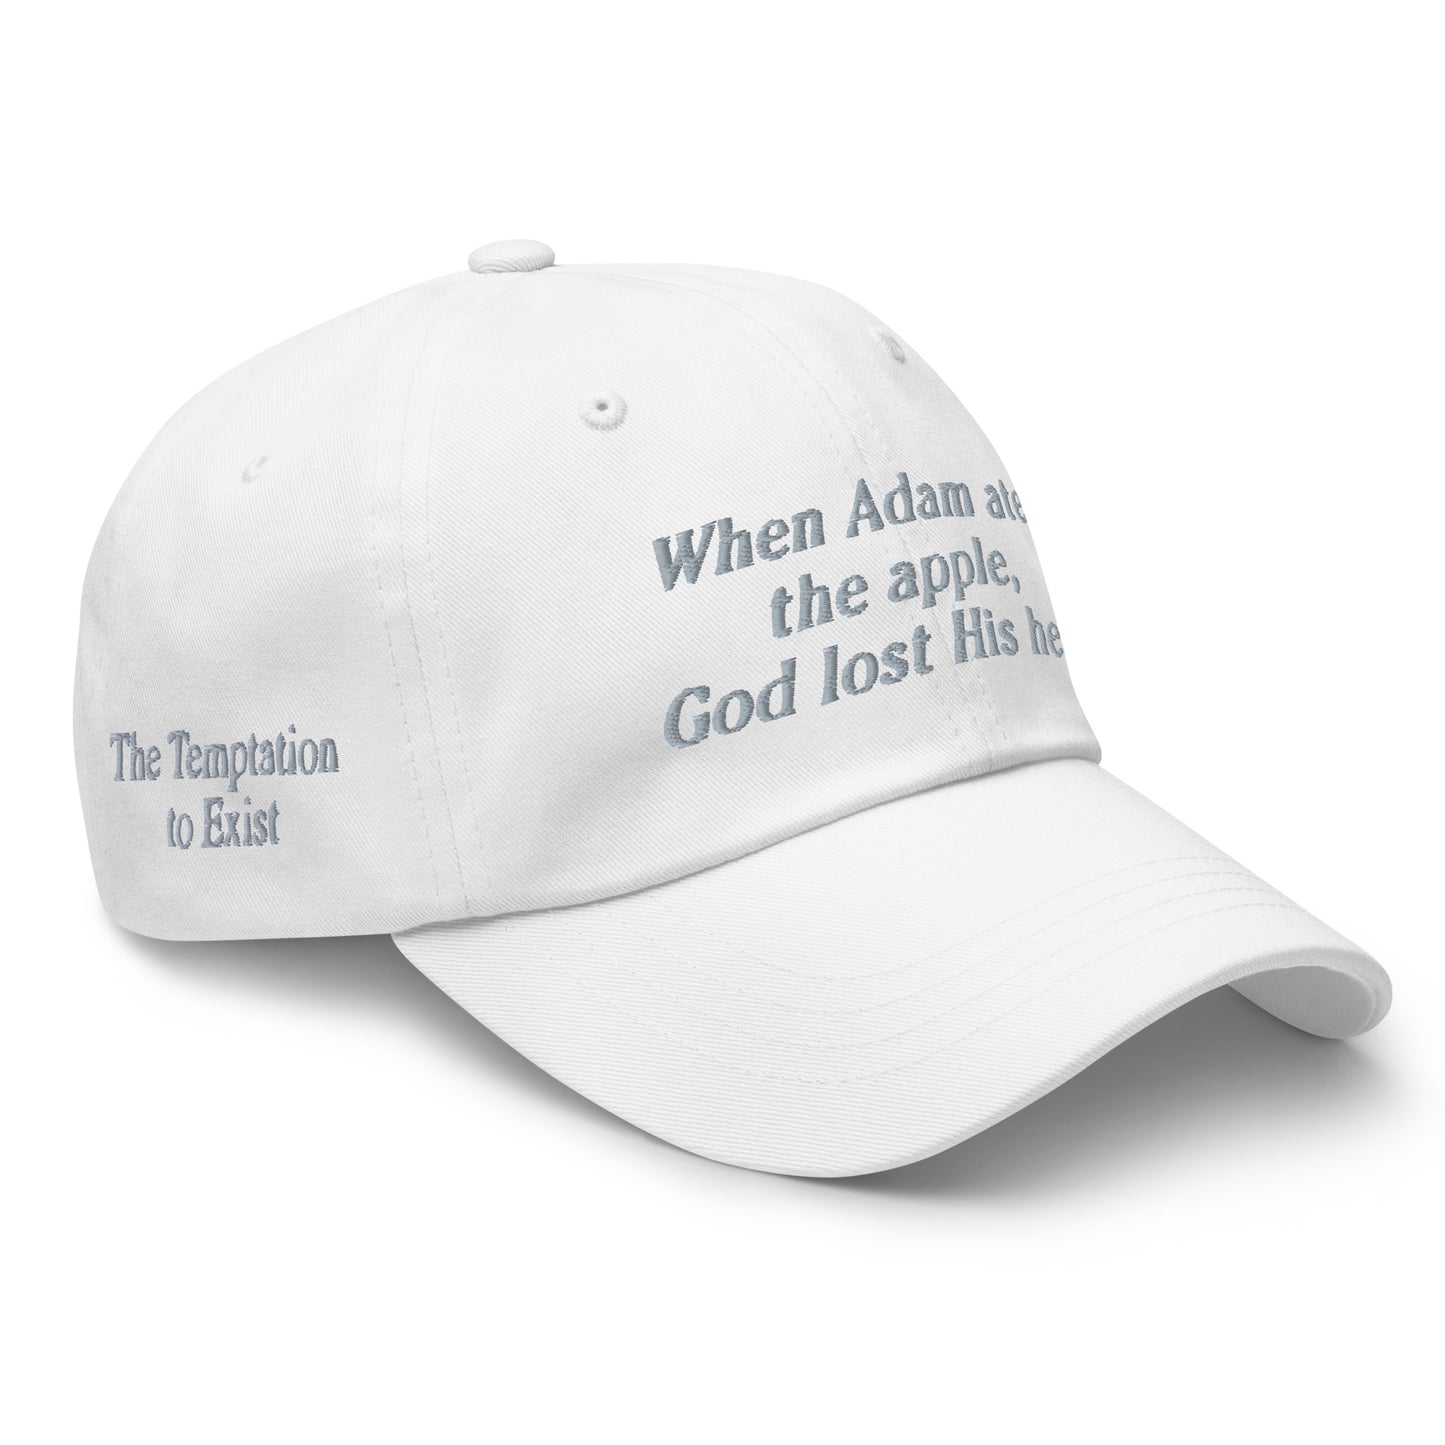 (03) the official CIORAN HEAD hat (but in white)